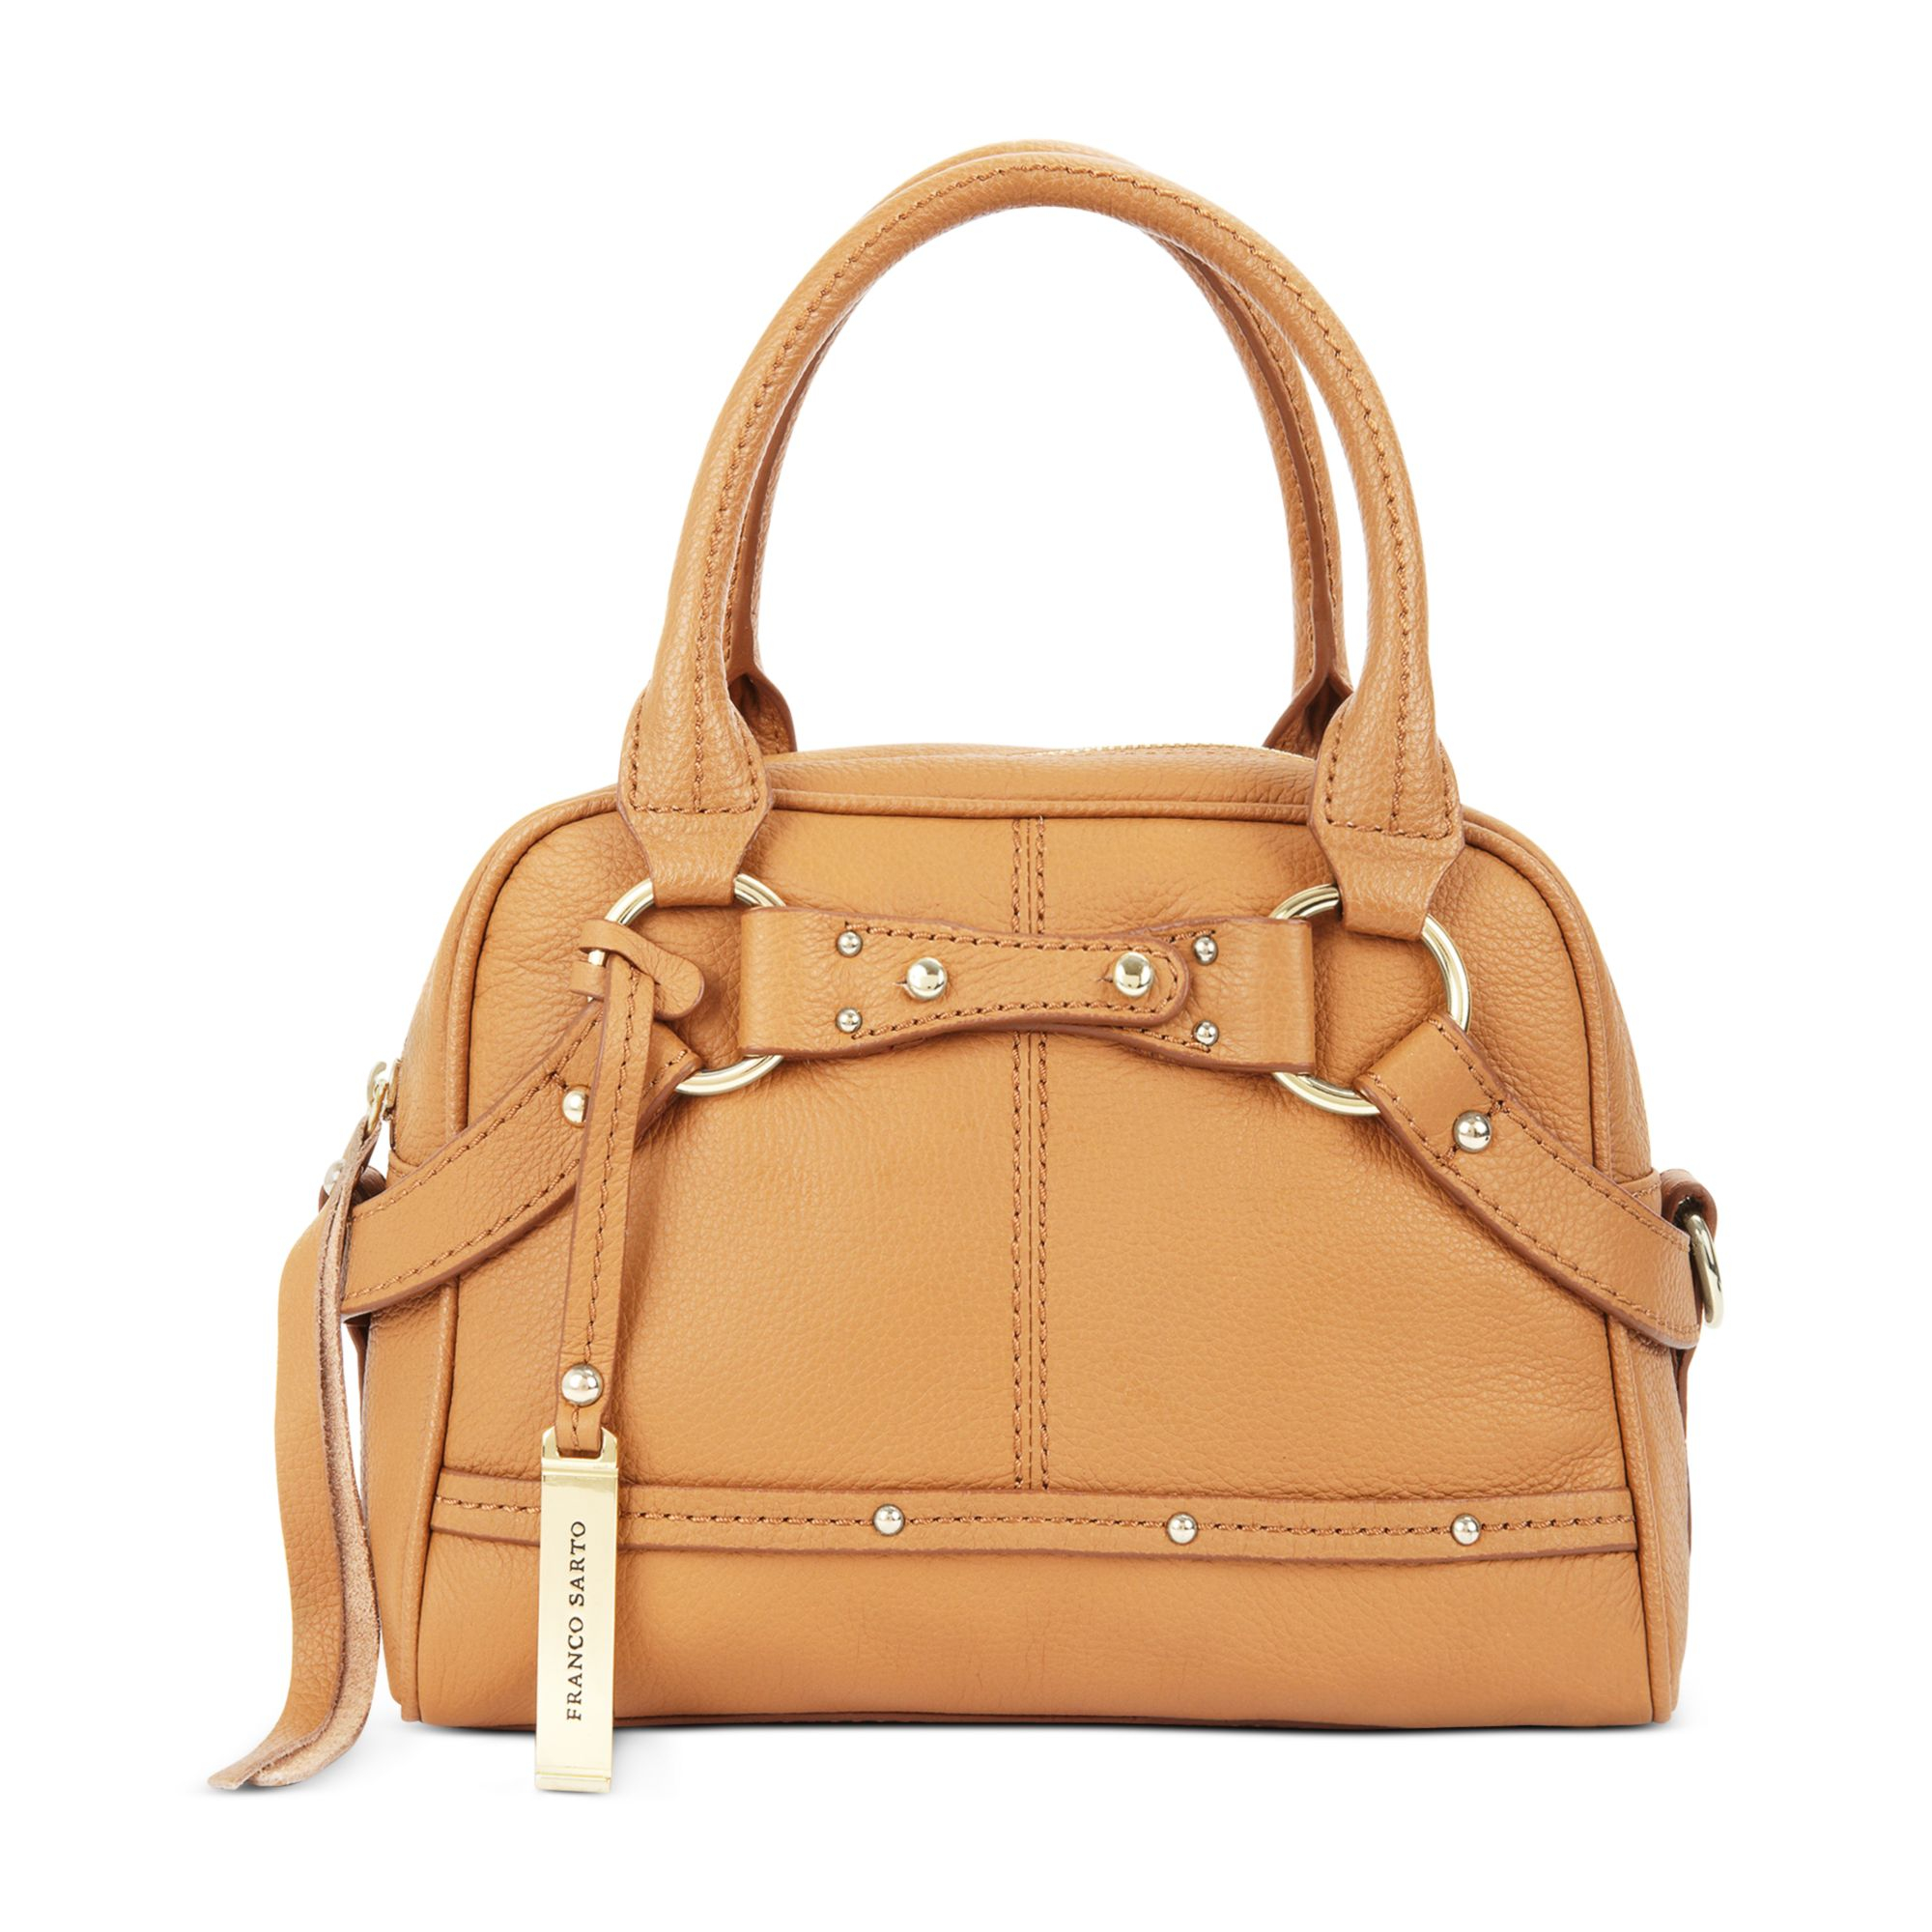 Franco Sarto Leather Arroyo Small Satchel in Brown (camelot) | Lyst